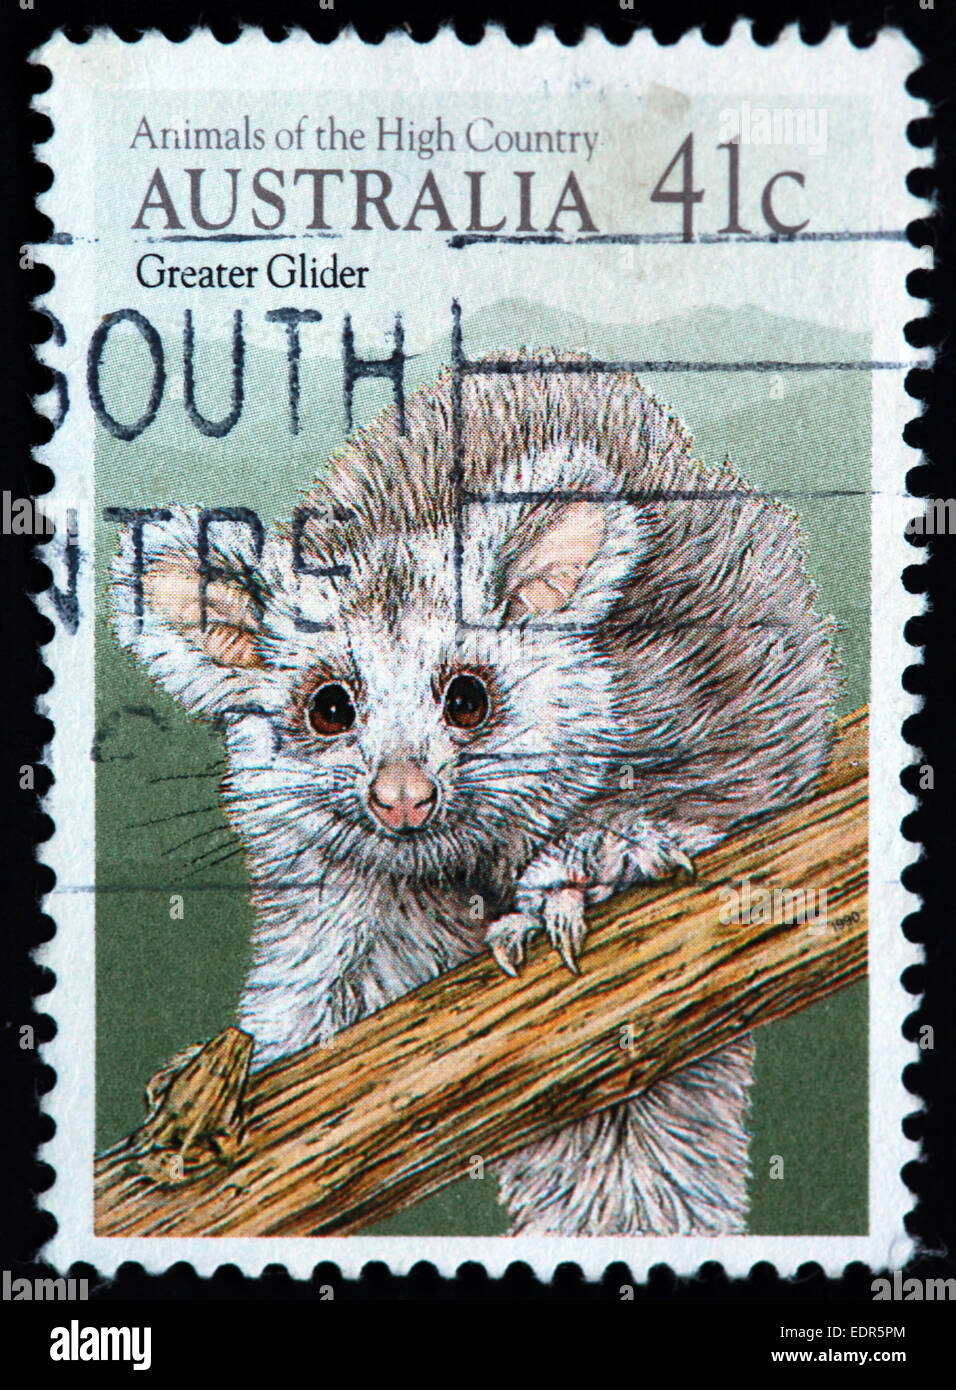 Used and postmarked Australia / Austrailian Stamp 41c Animals of the high country Greater Glider Stock Photo